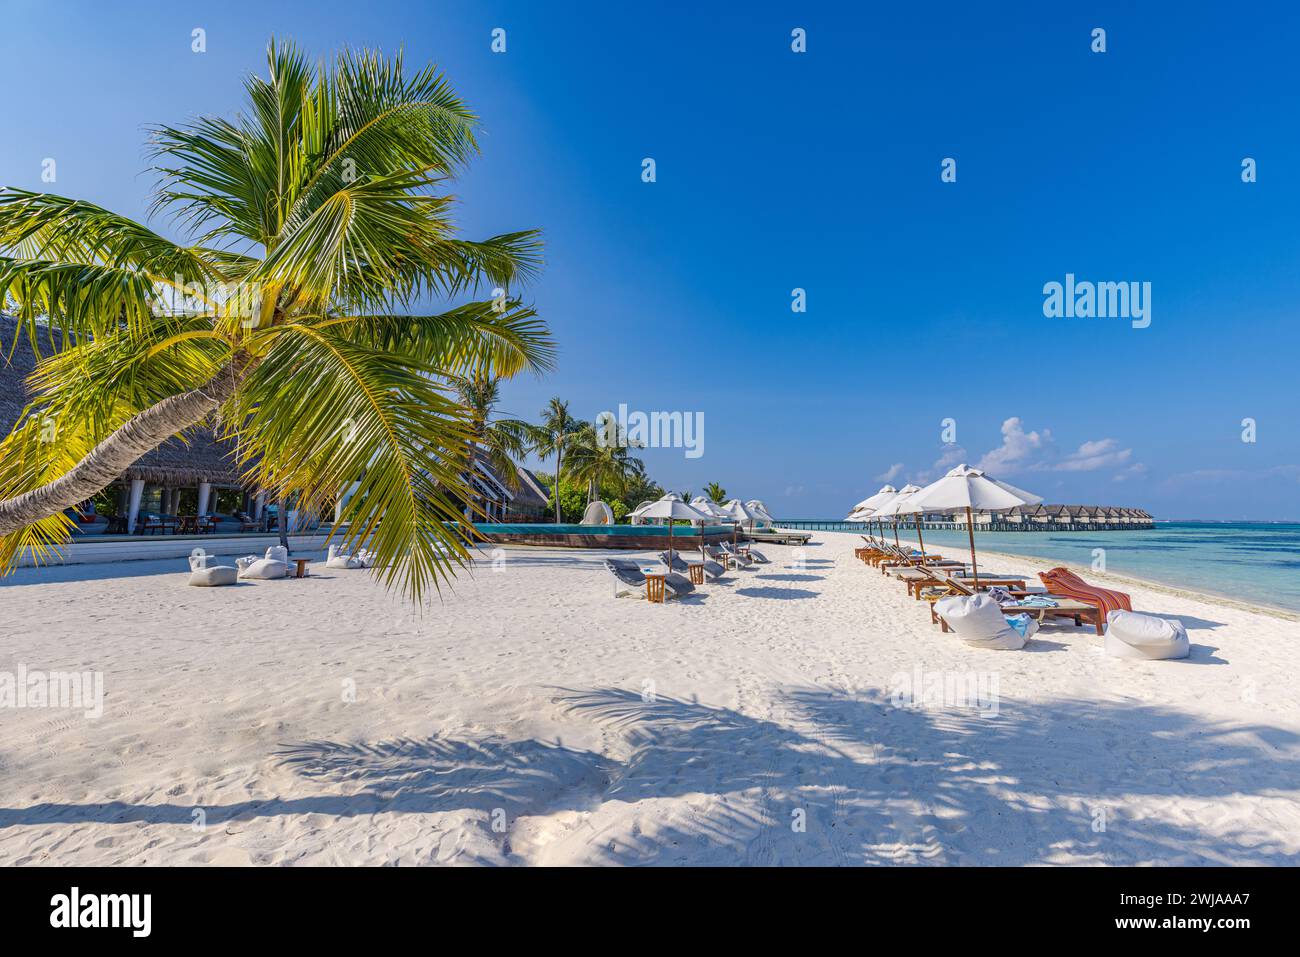 Relax tourism landscape. Luxurious beach resort with swimming pool and beach chairs or loungers leisure lifestyle, under umbrellas, palm trees sandy Stock Photo